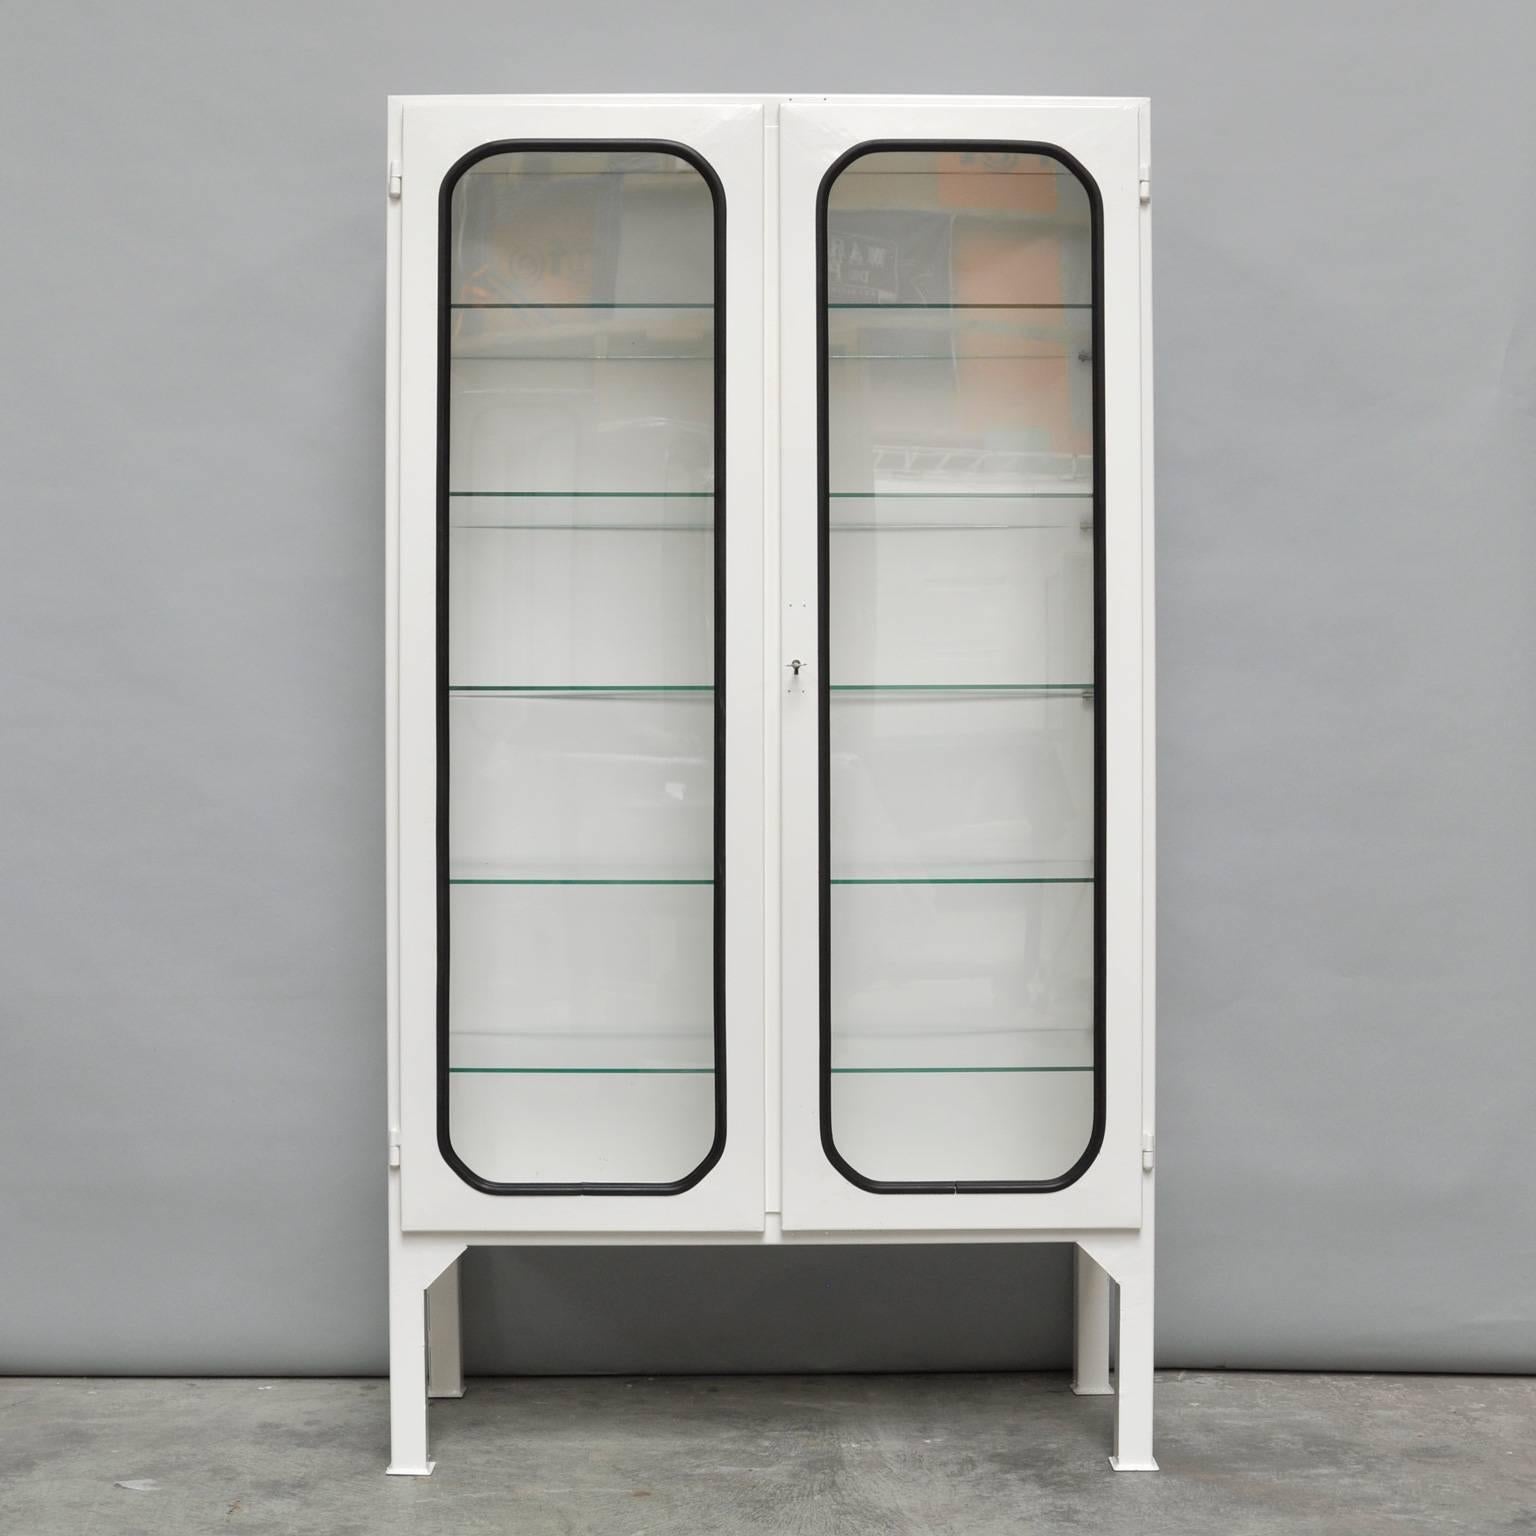 This medicine cabinet was designed in the 1970s and produced, circa 1975 in Hungary. It is made of steel and antique glass. The glass is held by a black rubber strip. The cabinet comes with five (new) adjustable glass shelves and a functioning lock.